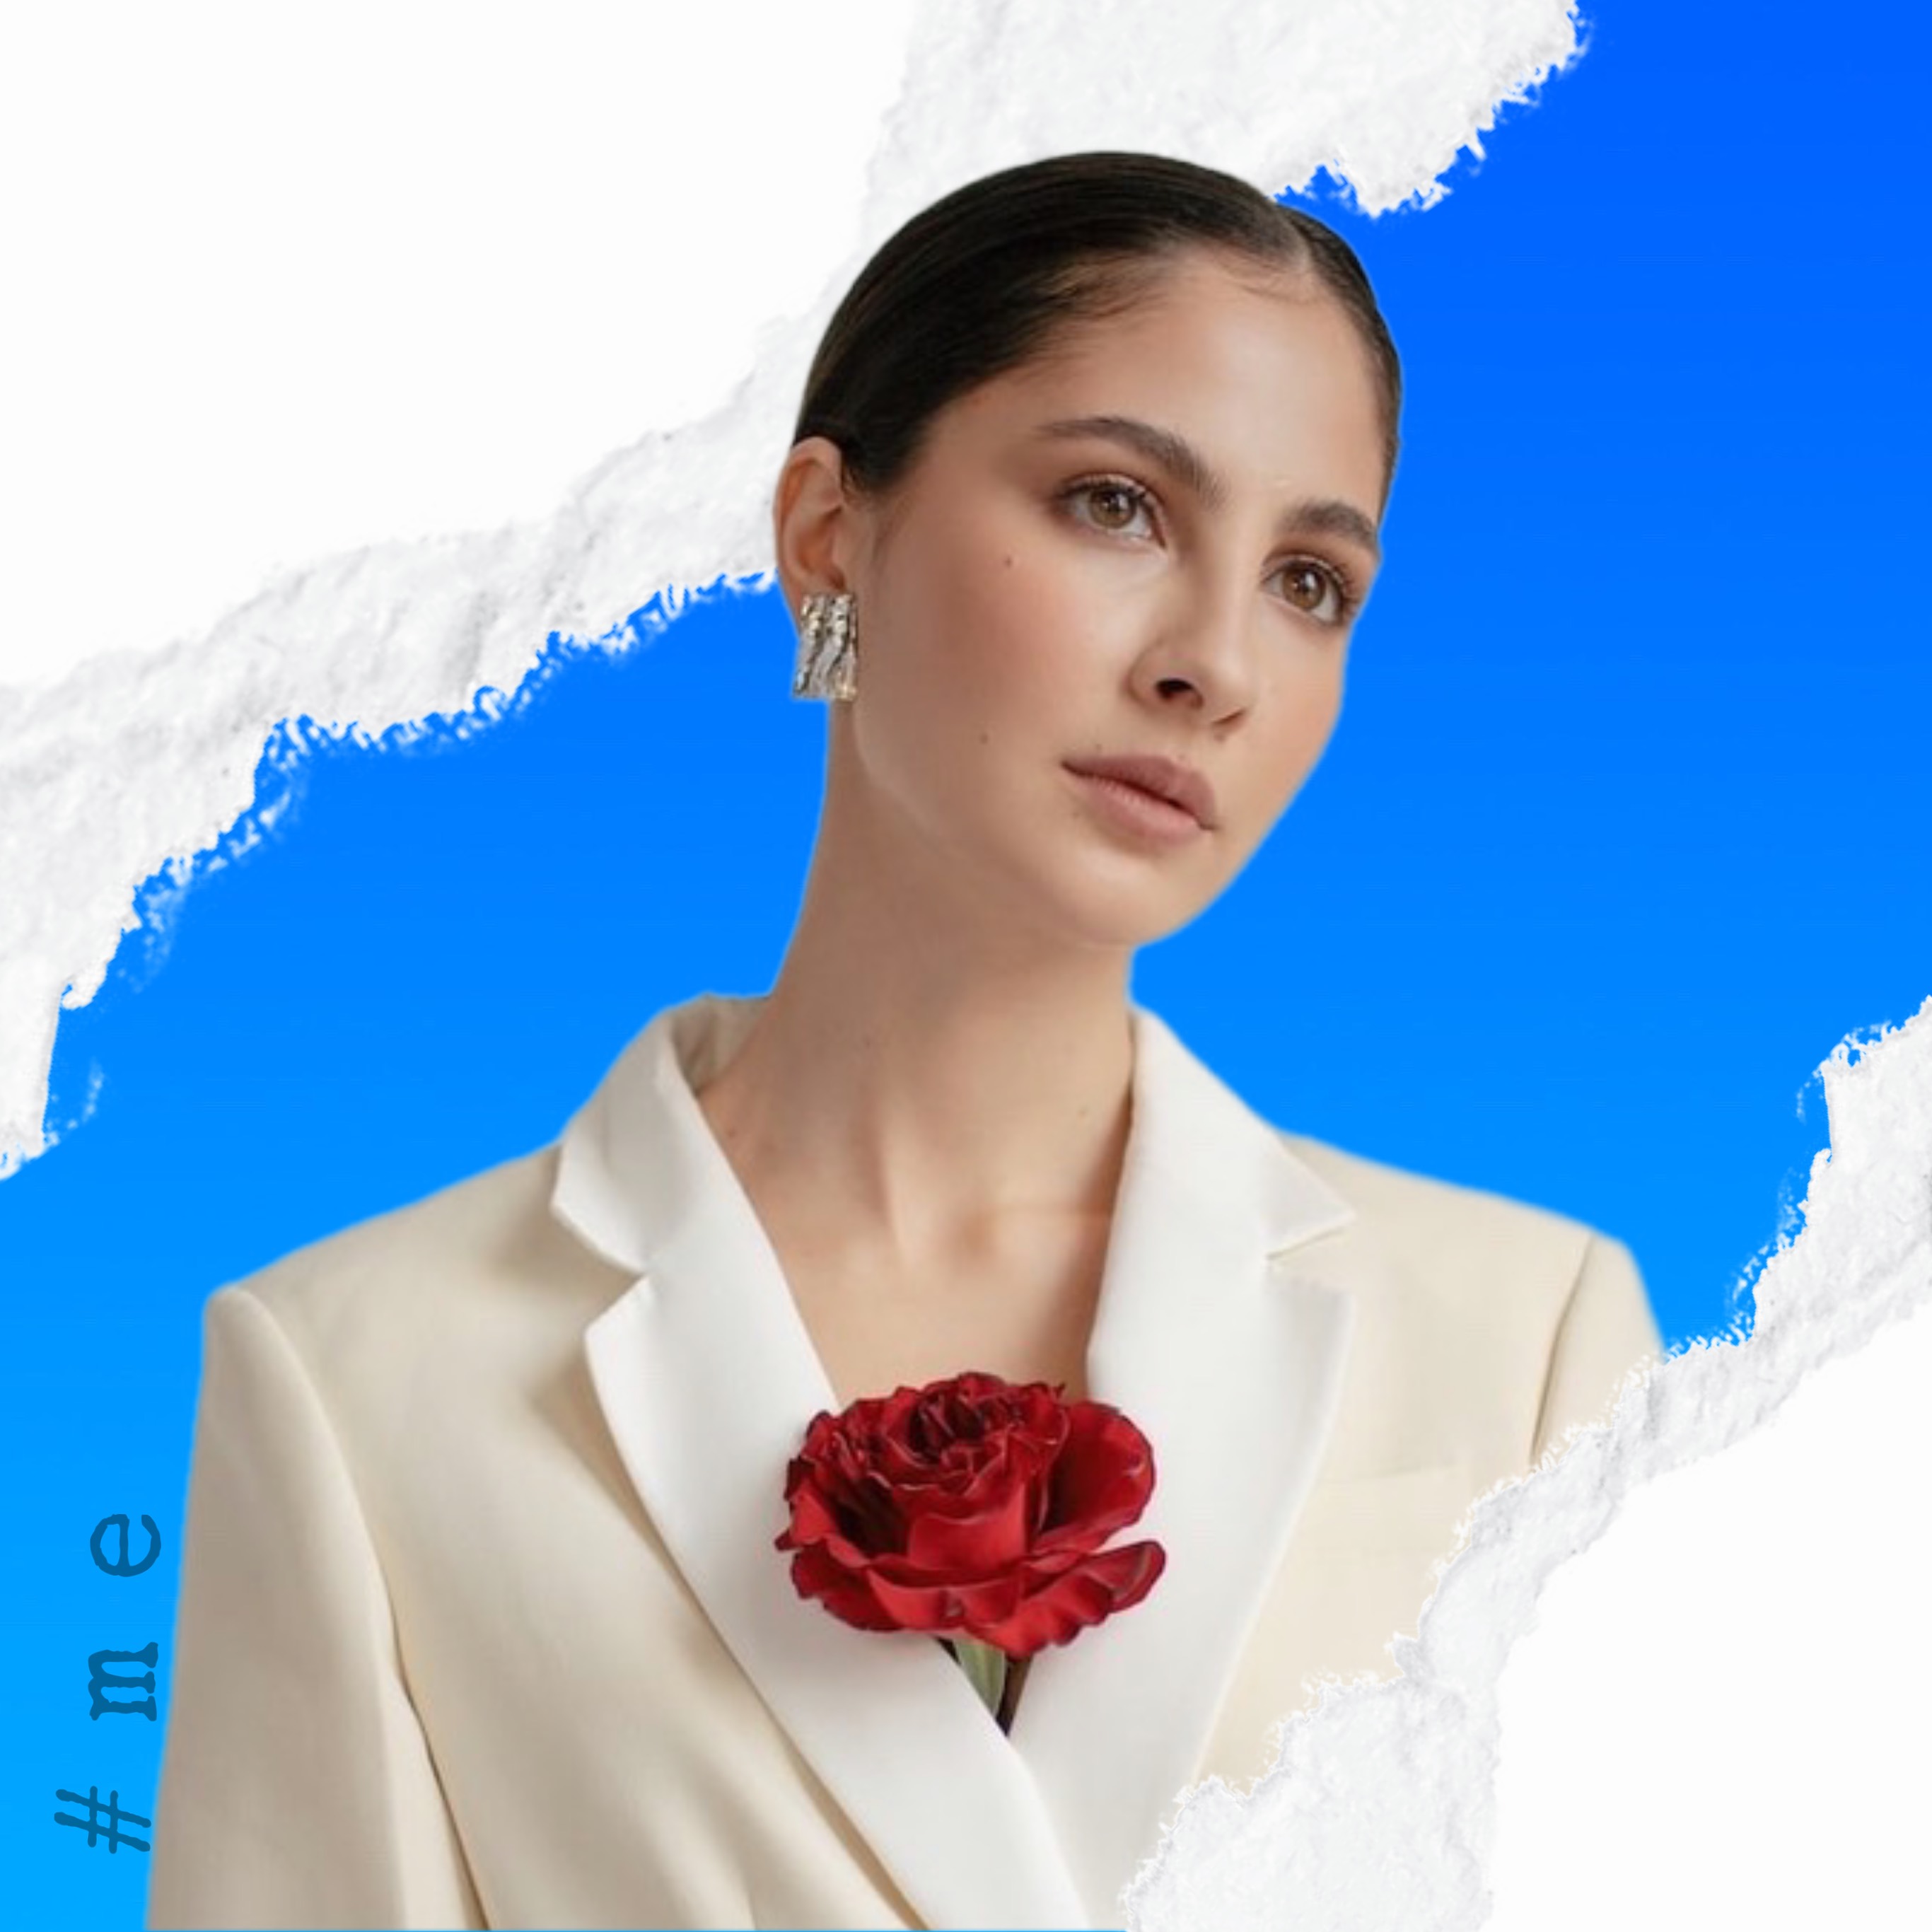 Profile Pic Of Woman In A White Suit And A Rose Blue And What Background Paper